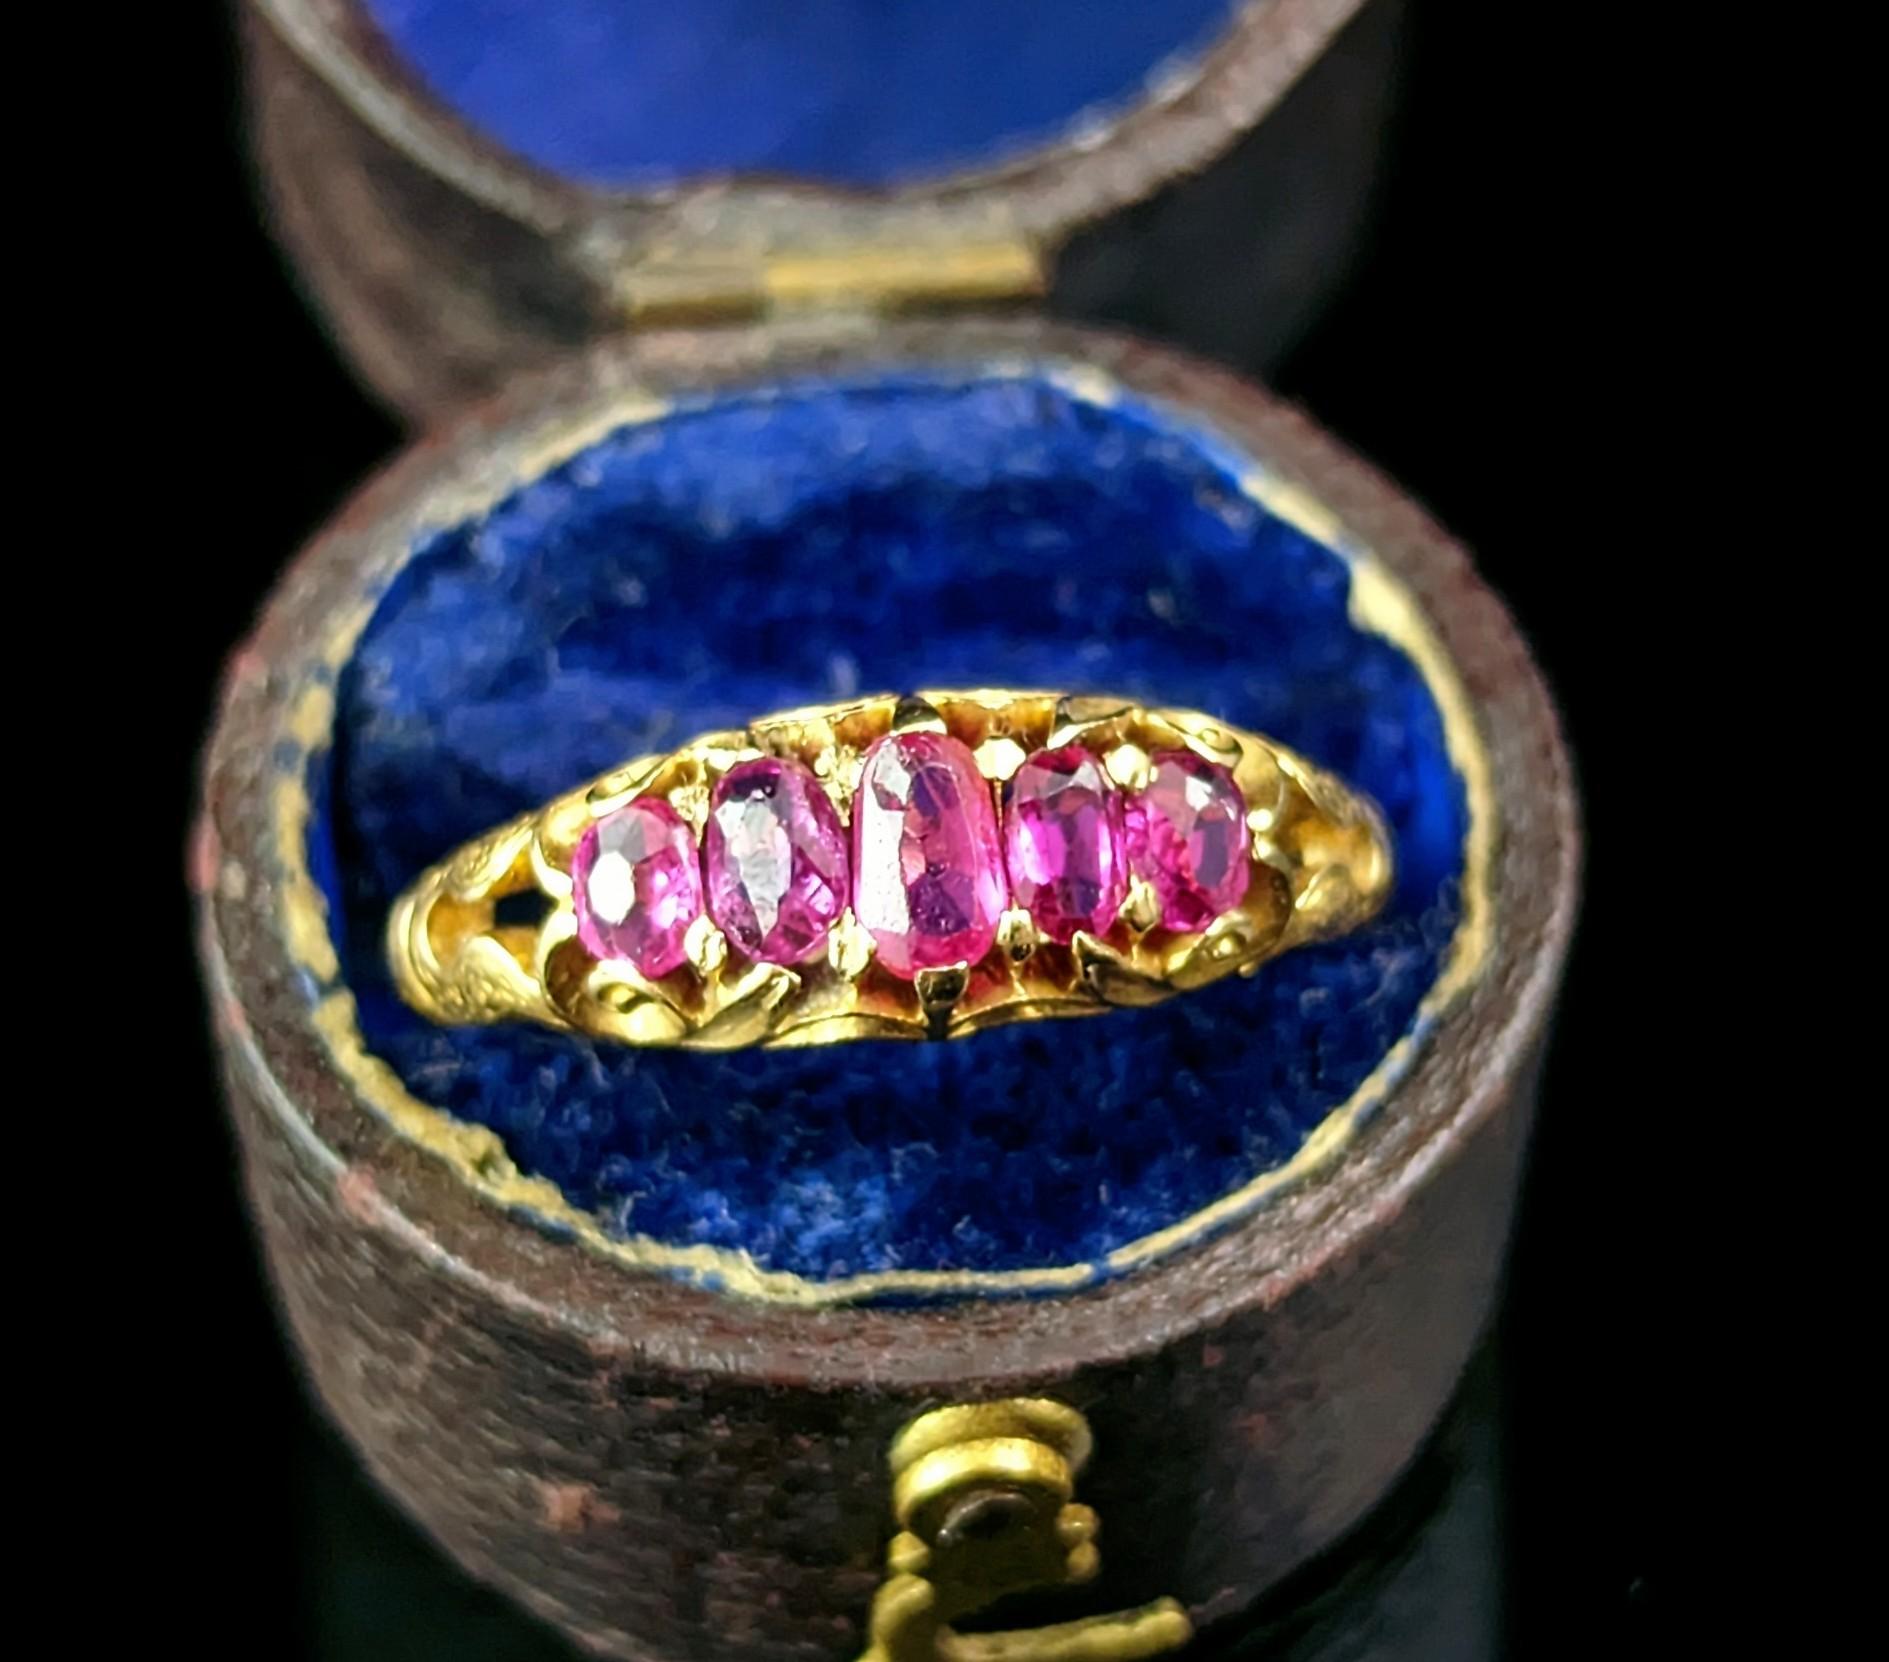 You can't help but be mesmerised by this antique Ruby rings magical rich charm.

It has a slightly mystical feel to it with the tall oval cut rubies and decorative rich gold shoulders.

The rubies are a lovely deep pinky red hue and they are really